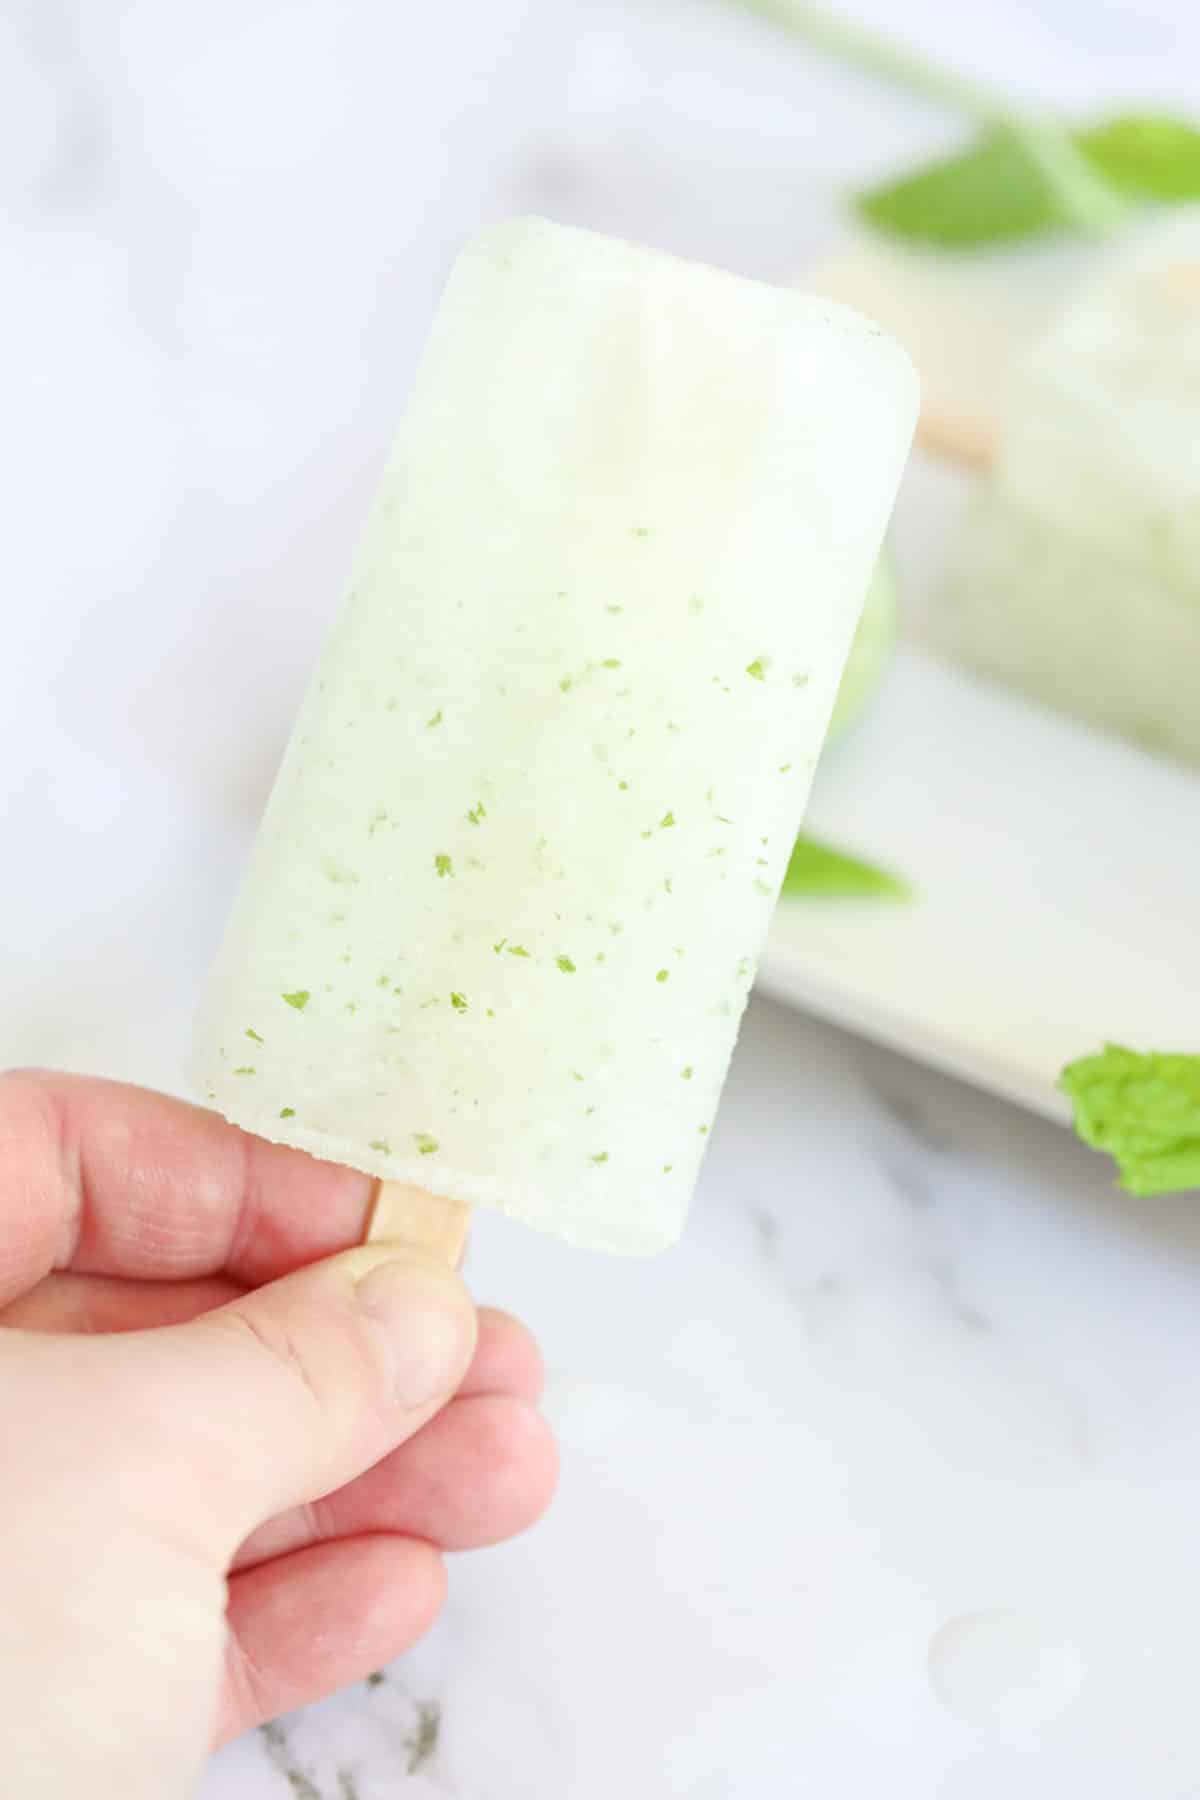 hand holding a mojito popsicle with mint pieces inside